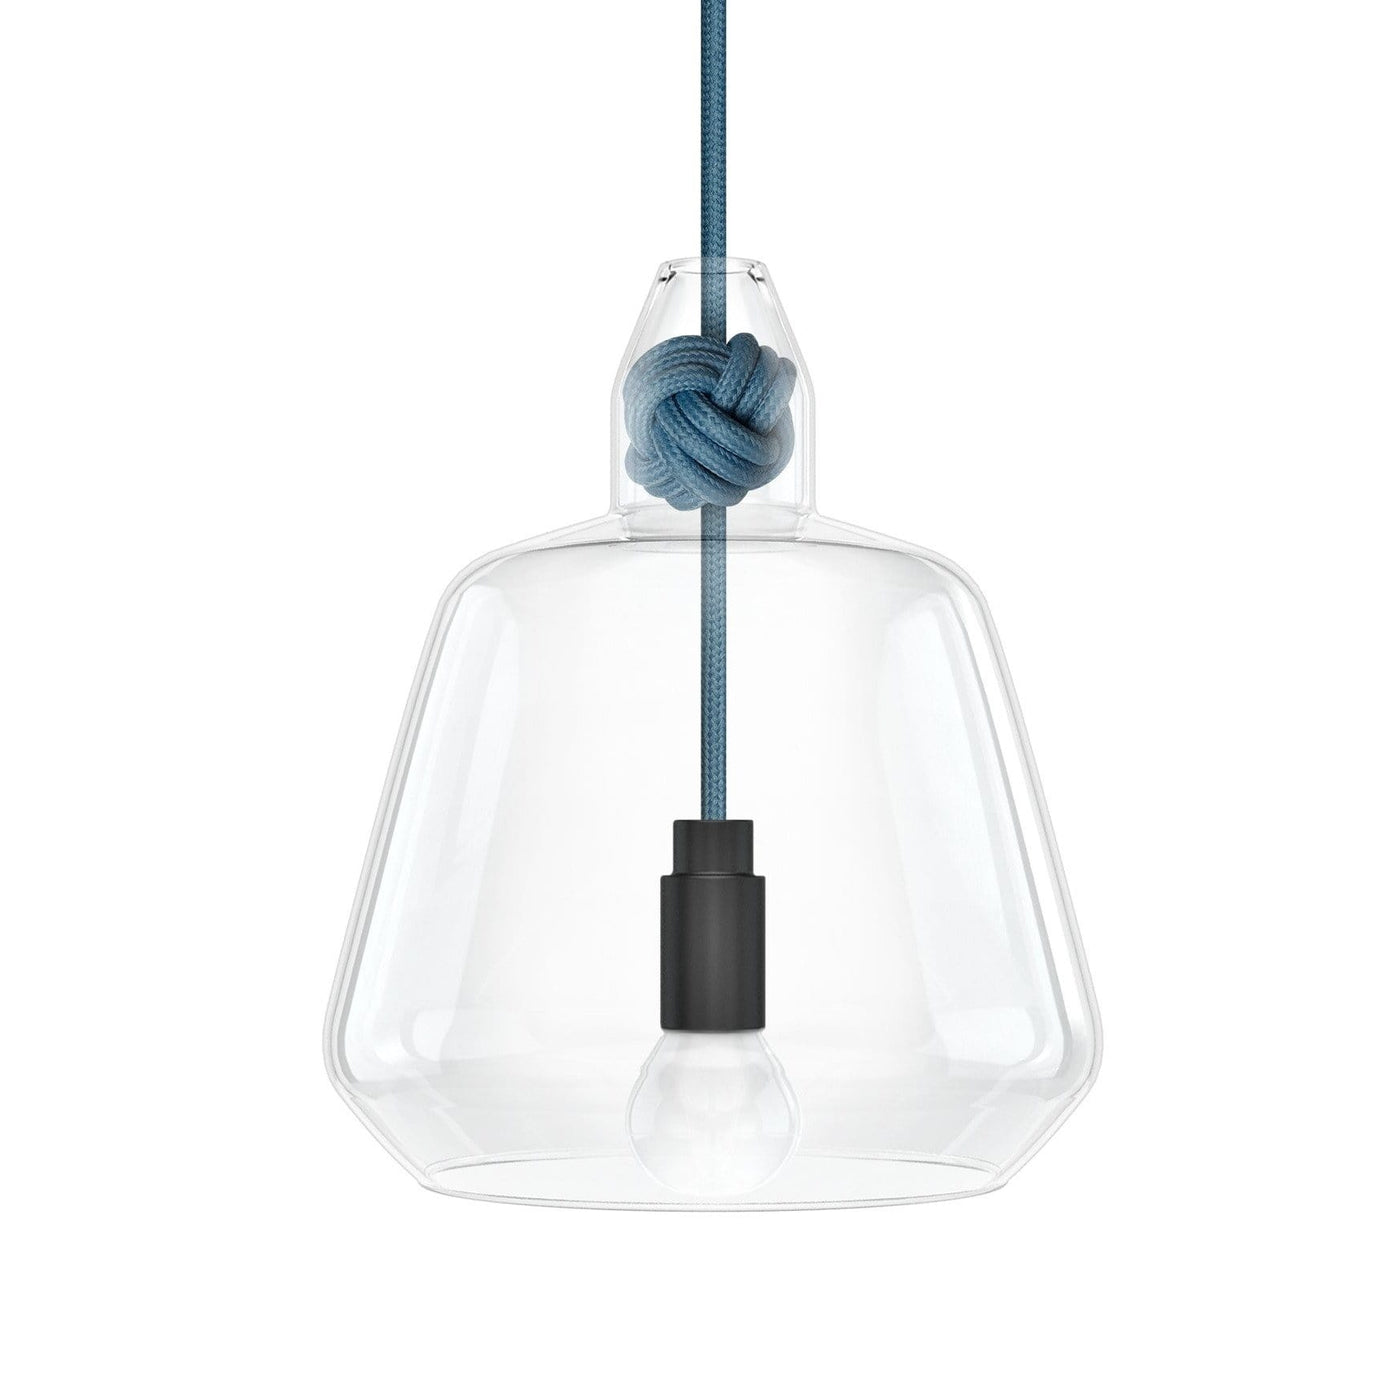 Knot Lamp is made from handblown glass with two shade designs, both supported by a monkey fist knot in a choice of 6 colours.  Pictured here with mid blue fabric cord.  Beautiful, simple and versatile lighting.